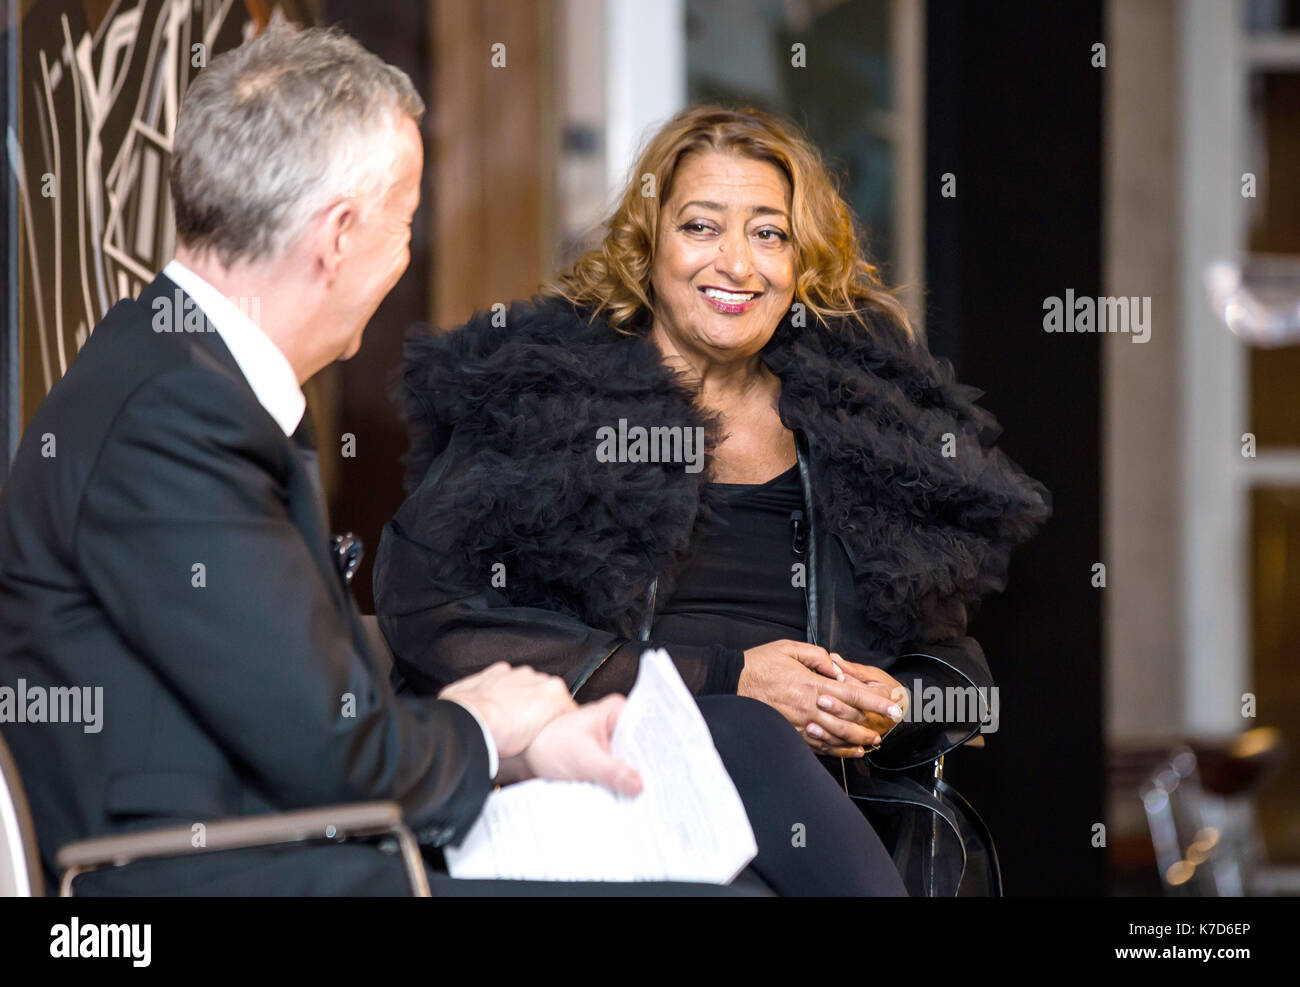 Photo Must Be Credited ©Alpha Press 076656 03/02/2016 Dame Zaha Hadid  Receives The Riba Royal Gold Medal 2016 For Architecture At Riba Royal  Institute Of British Architects In London. She Is The